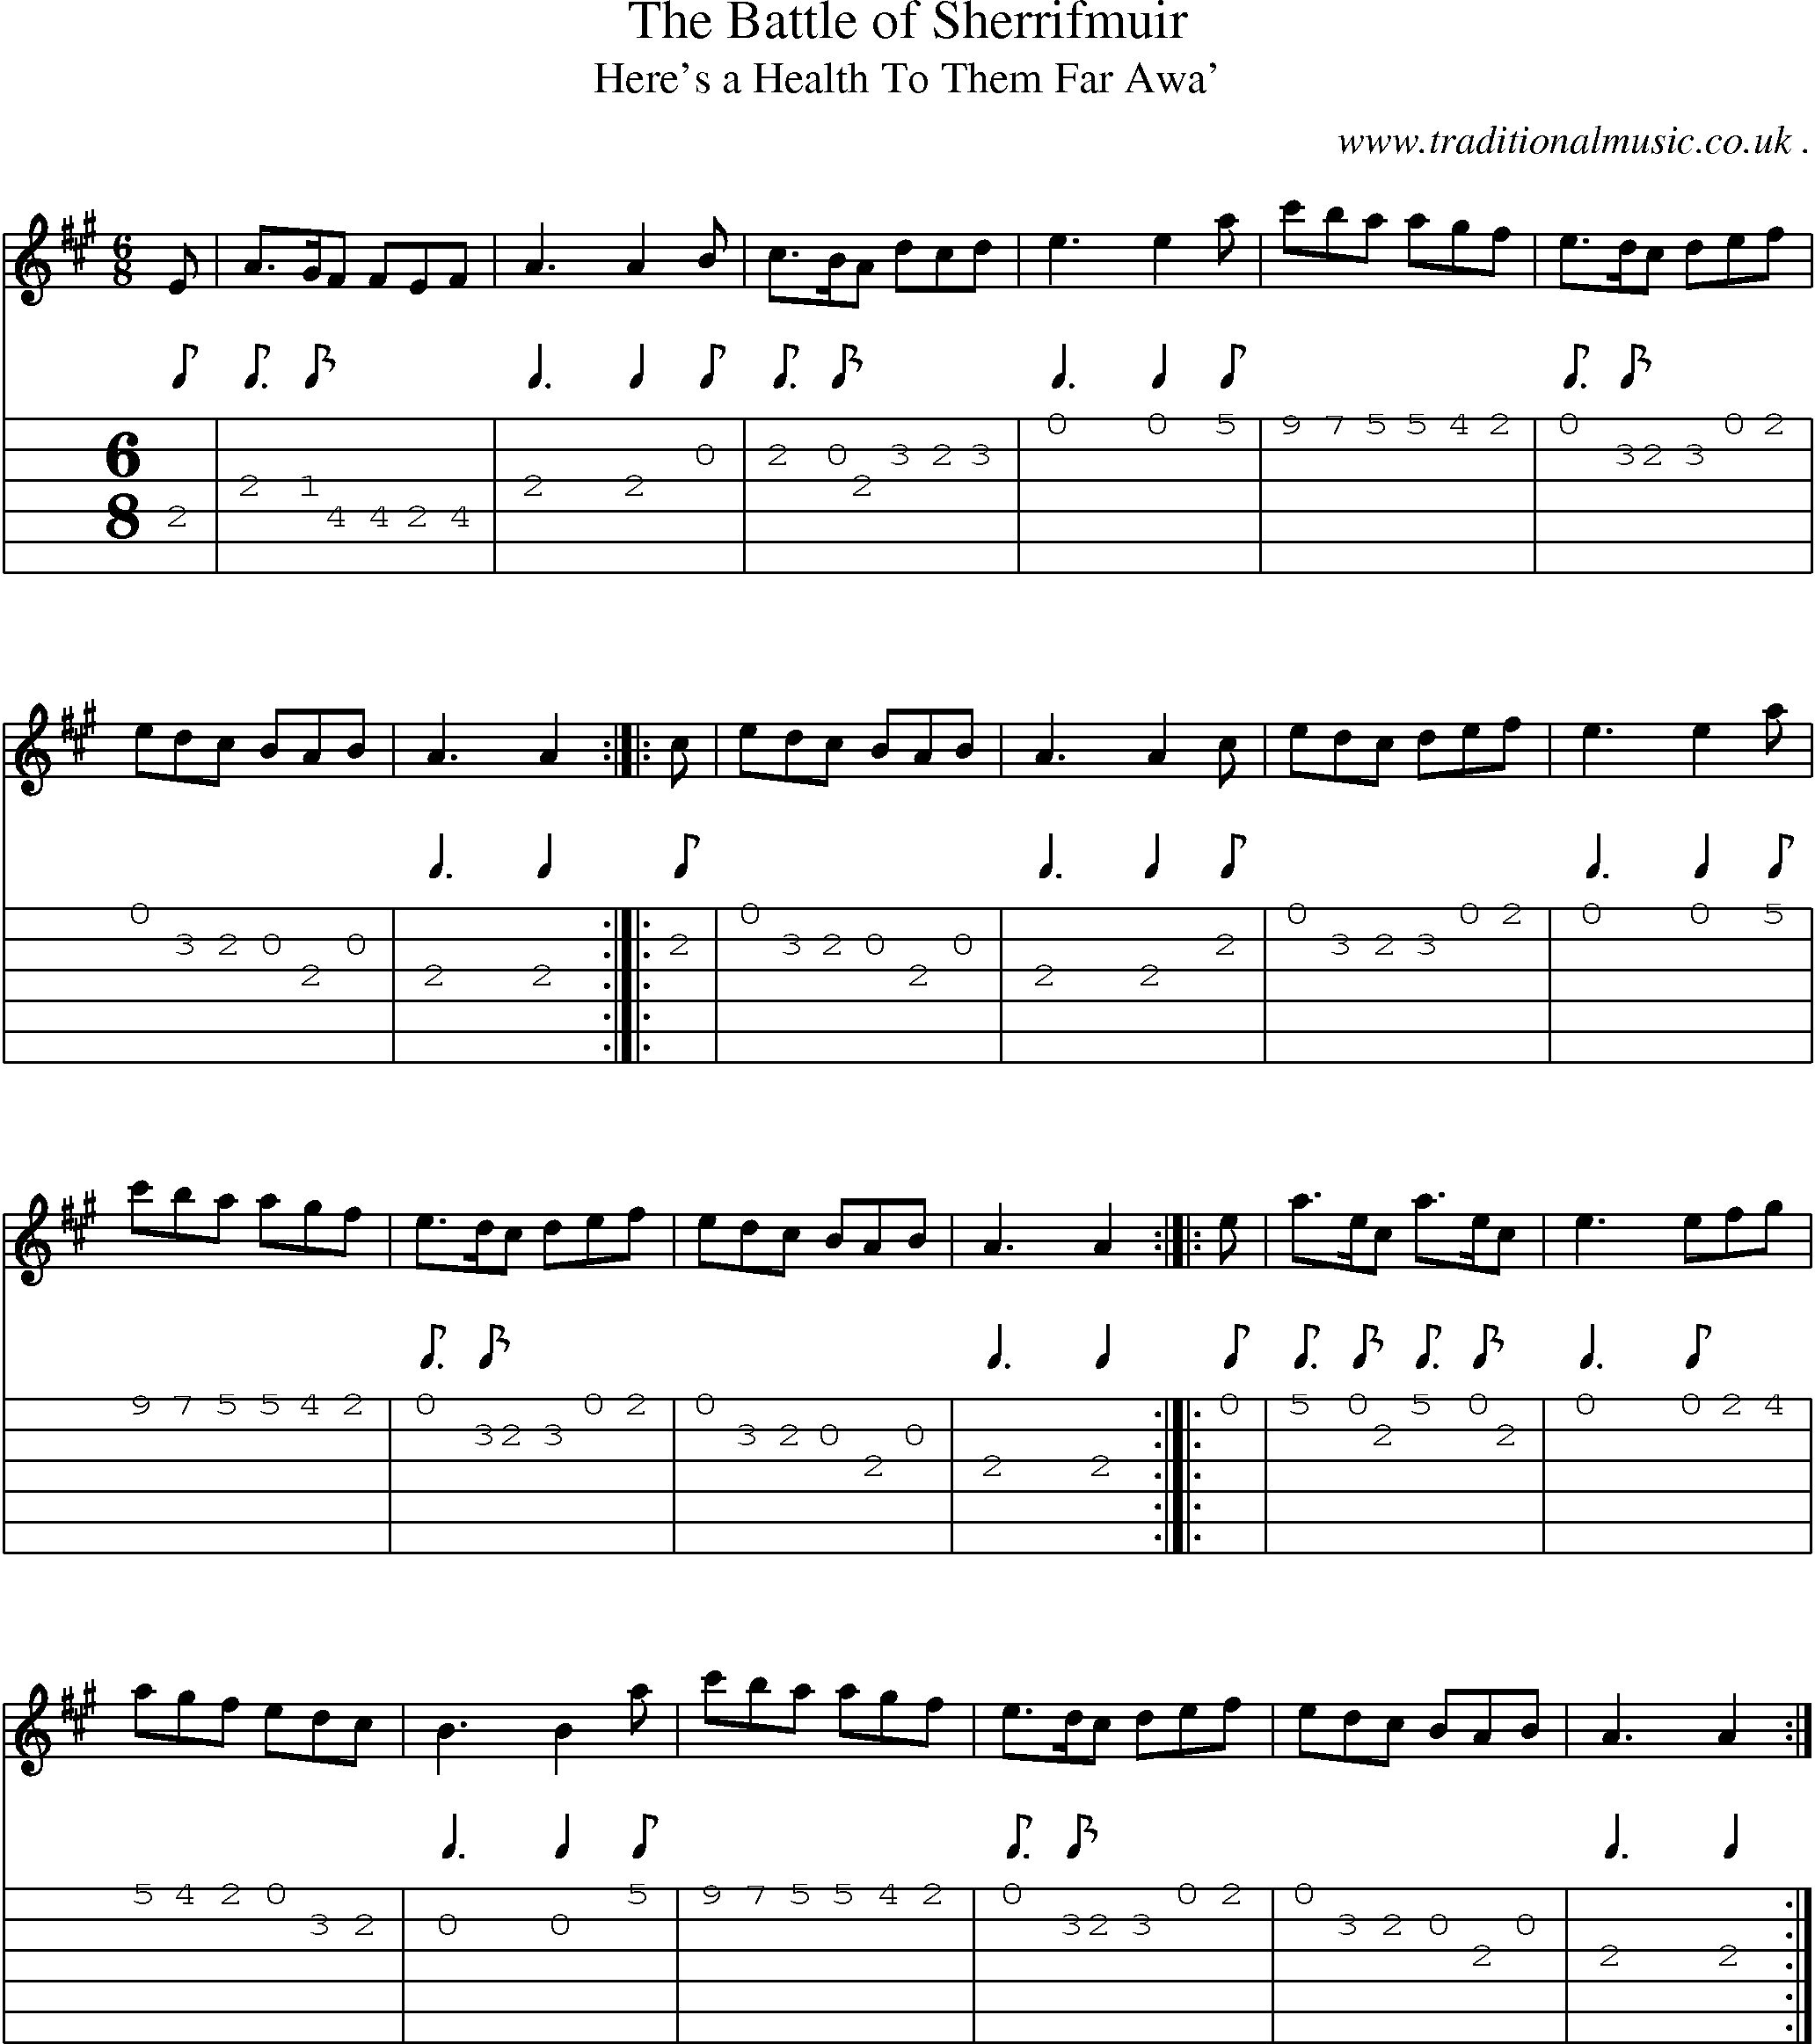 Sheet-music  score, Chords and Guitar Tabs for The Battle Of Sherrifmuir